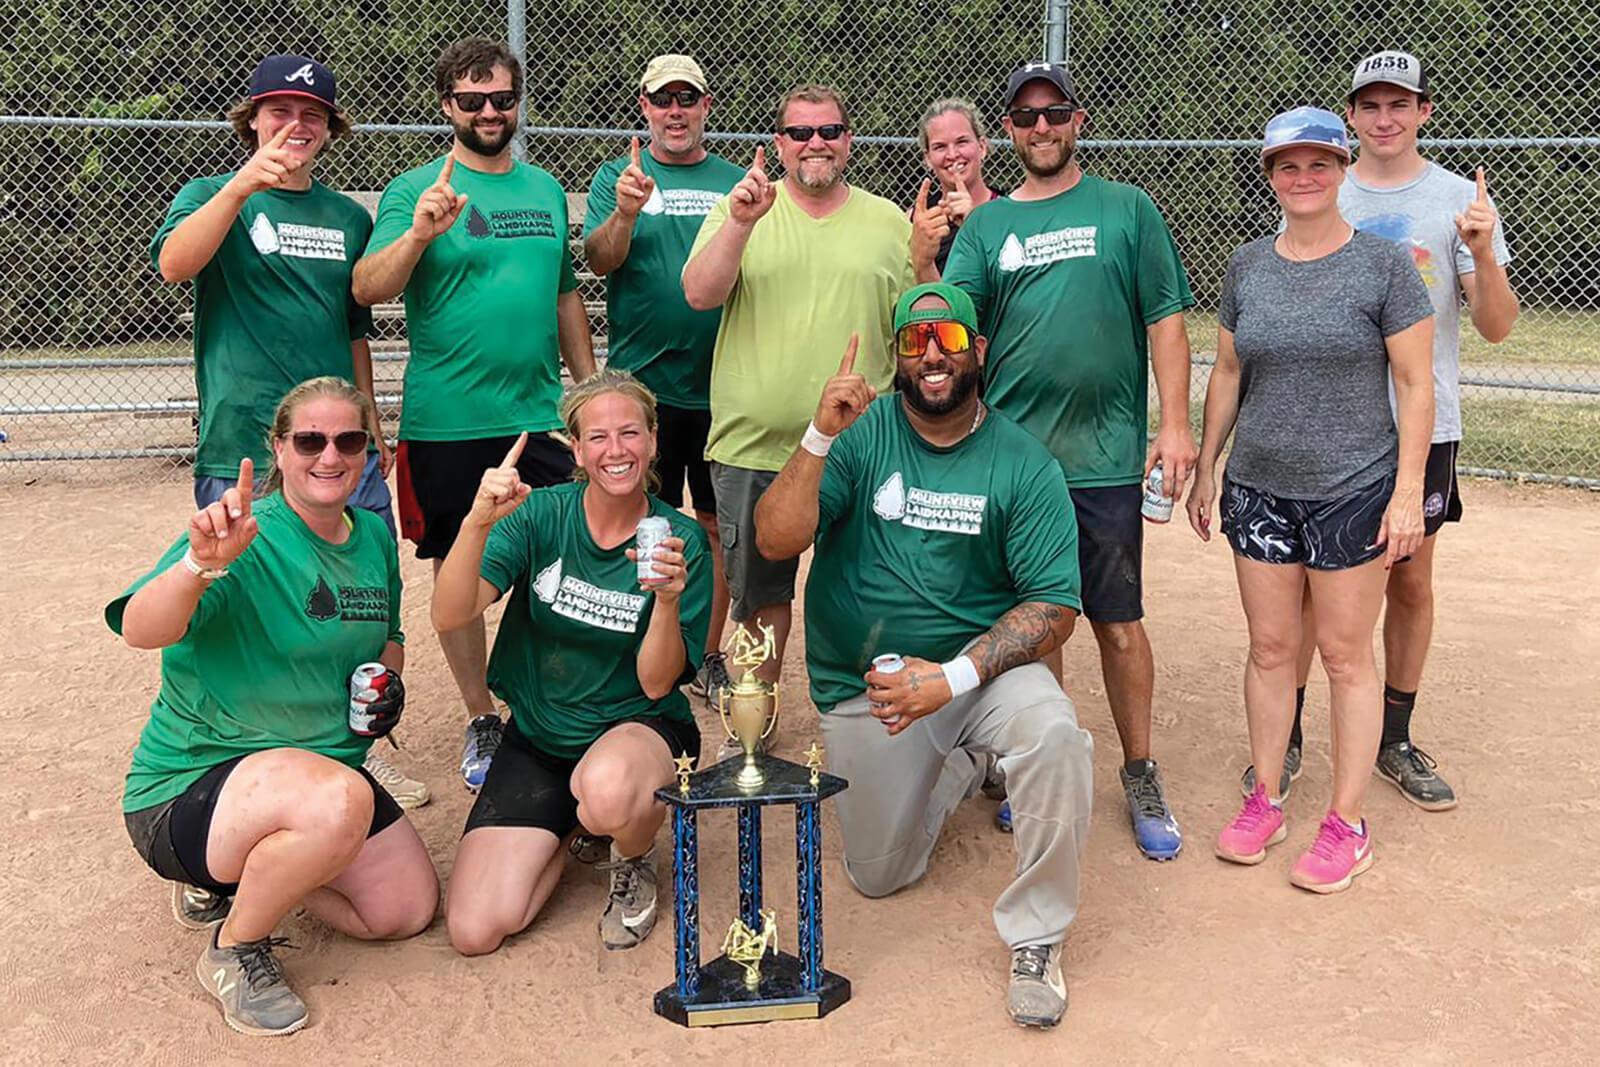 Mountainview Landscaping takes top spot at London Chapter softball tournament